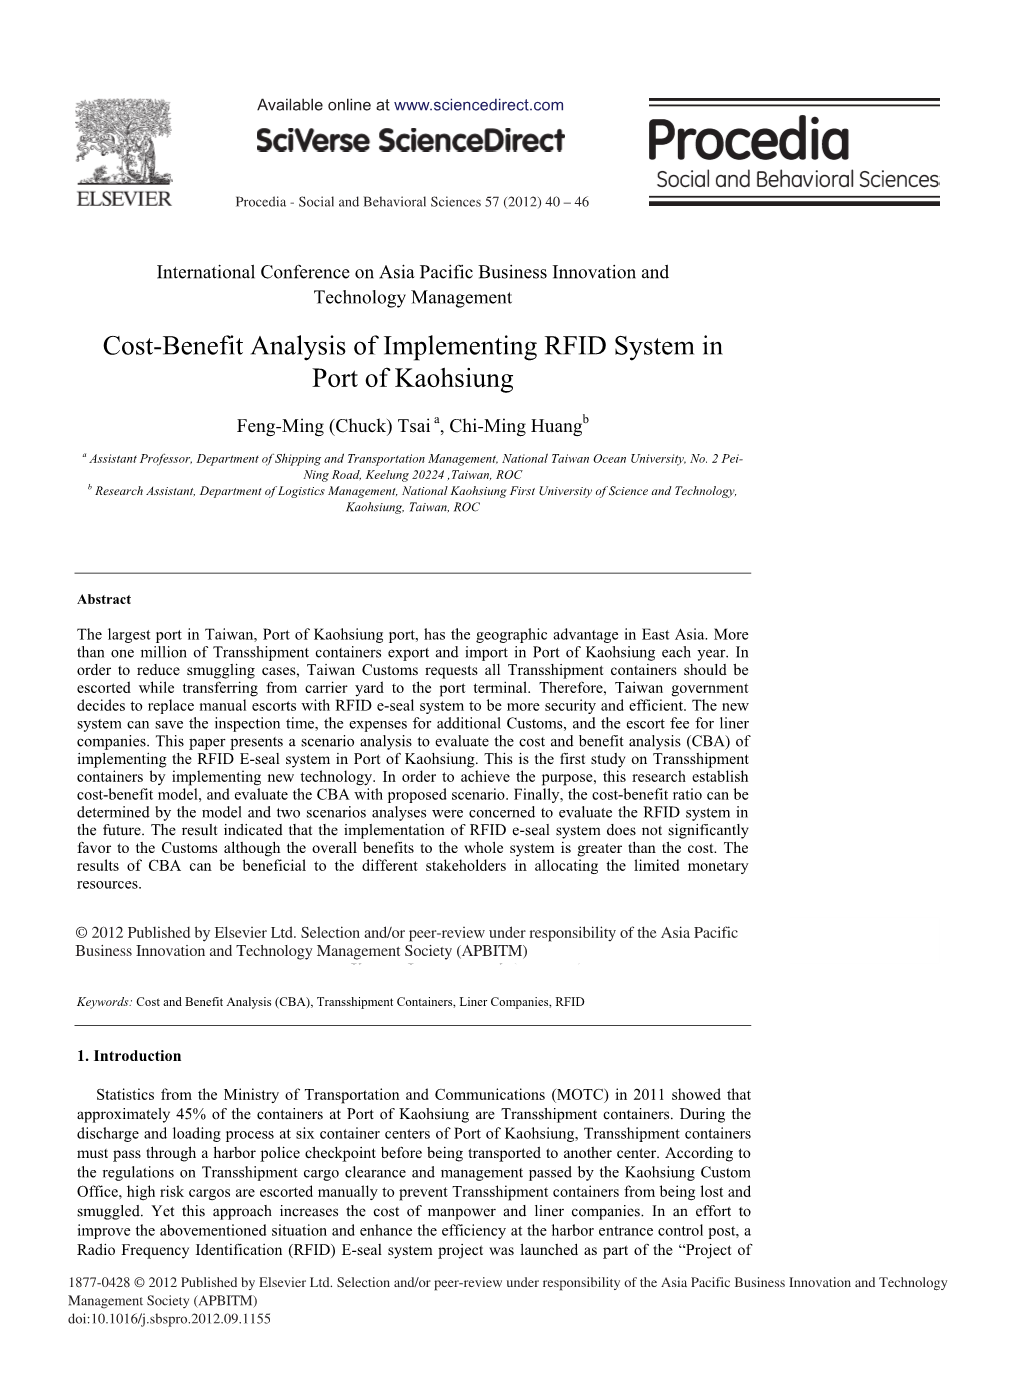 Cost-Benefit Analysis of Implementing RFID System in Port of Kaohsiung